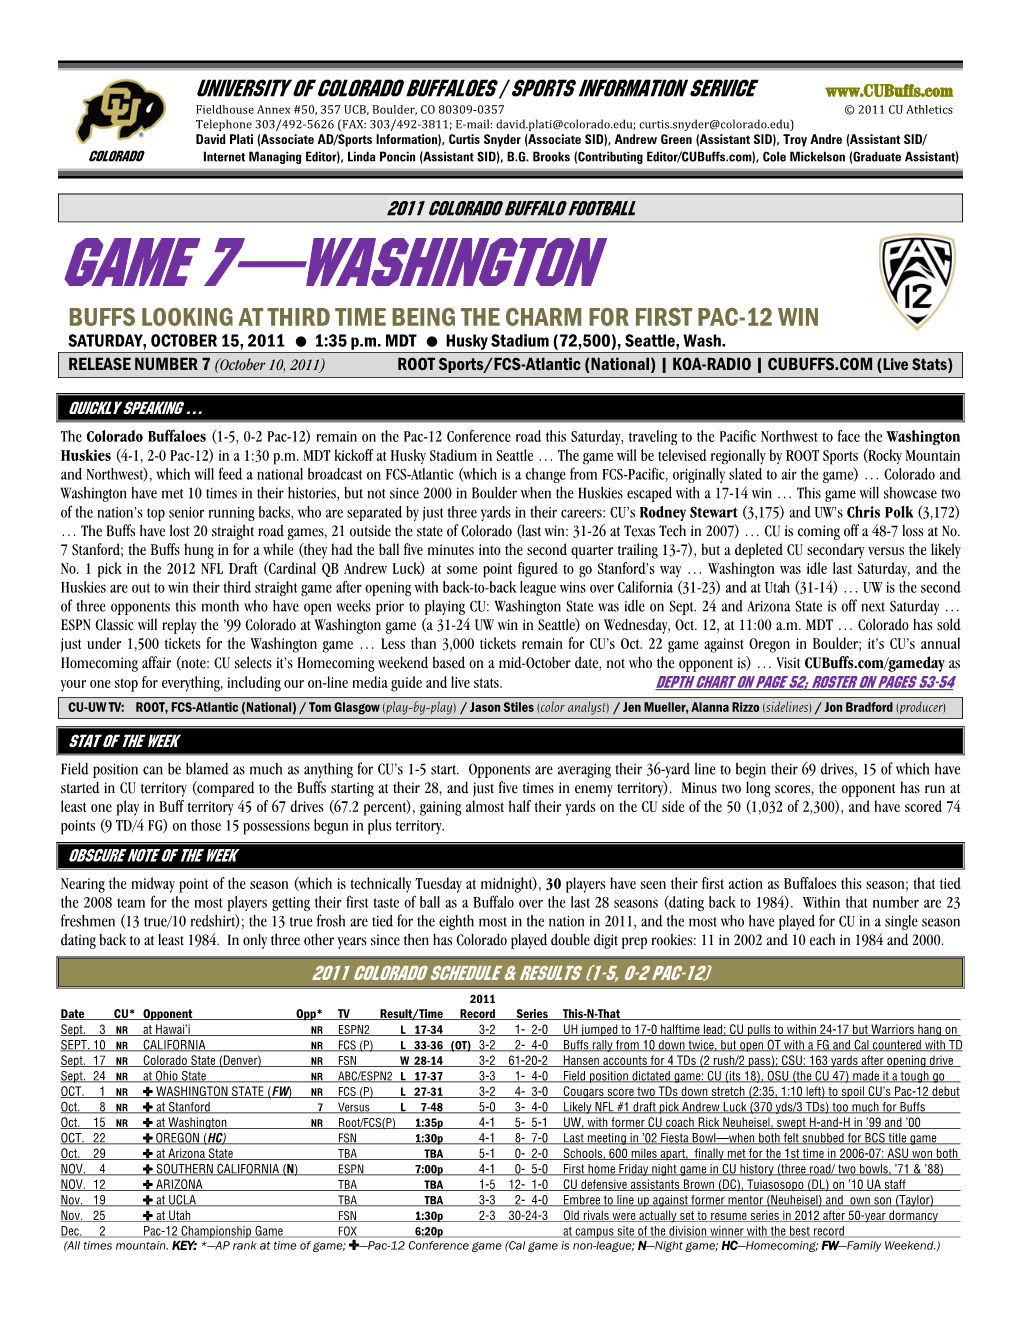 GAME 7—WASHINGTON BUFFS LOOKING at THIRD TIME BEING the CHARM for FIRST PAC-12 WIN SATURDAY, OCTOBER 15, 2011 � 1:35 P.M